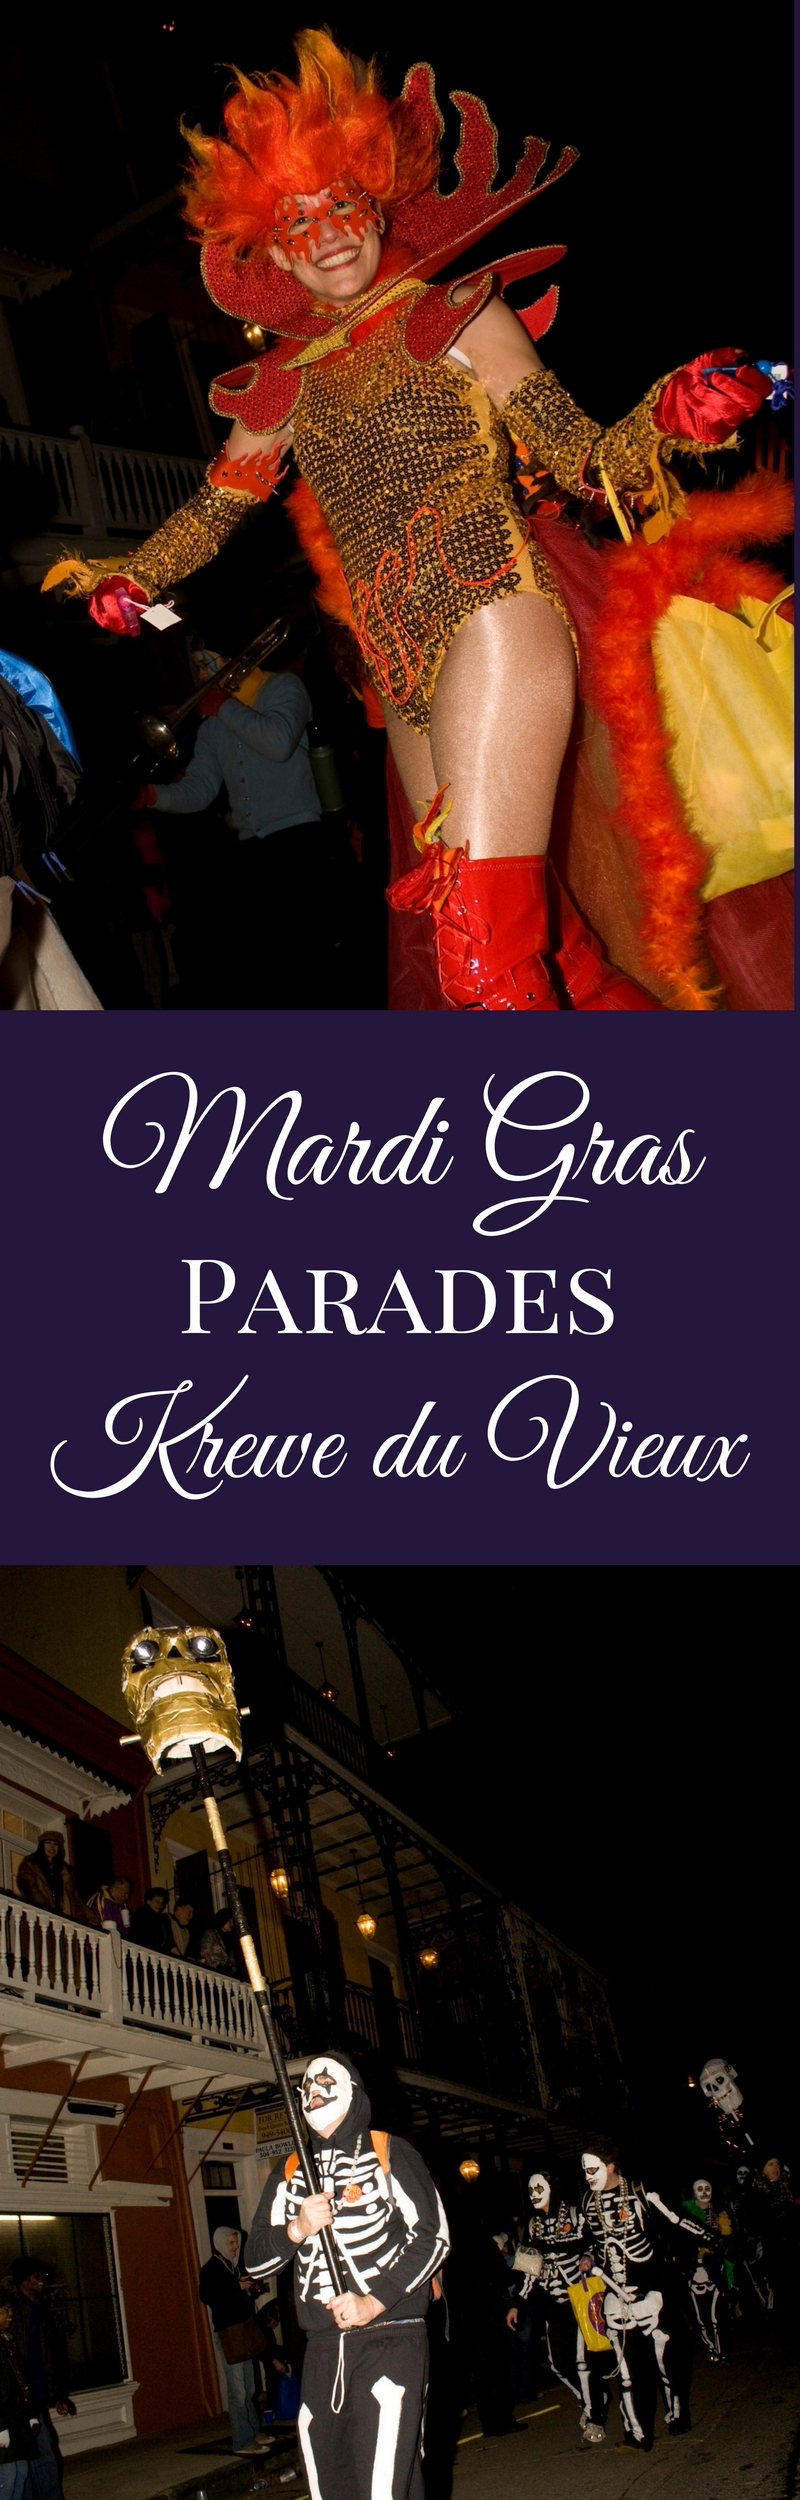 Krewe du Vieux is the traditional kickoff of the Mardi Gras parade season in New Orleans. The parade route starts in the Marigny at Franklin and Royal Street and winds through the French Quarter and Central Business District. (Photos courtesy Flickr user Derek Bridges)